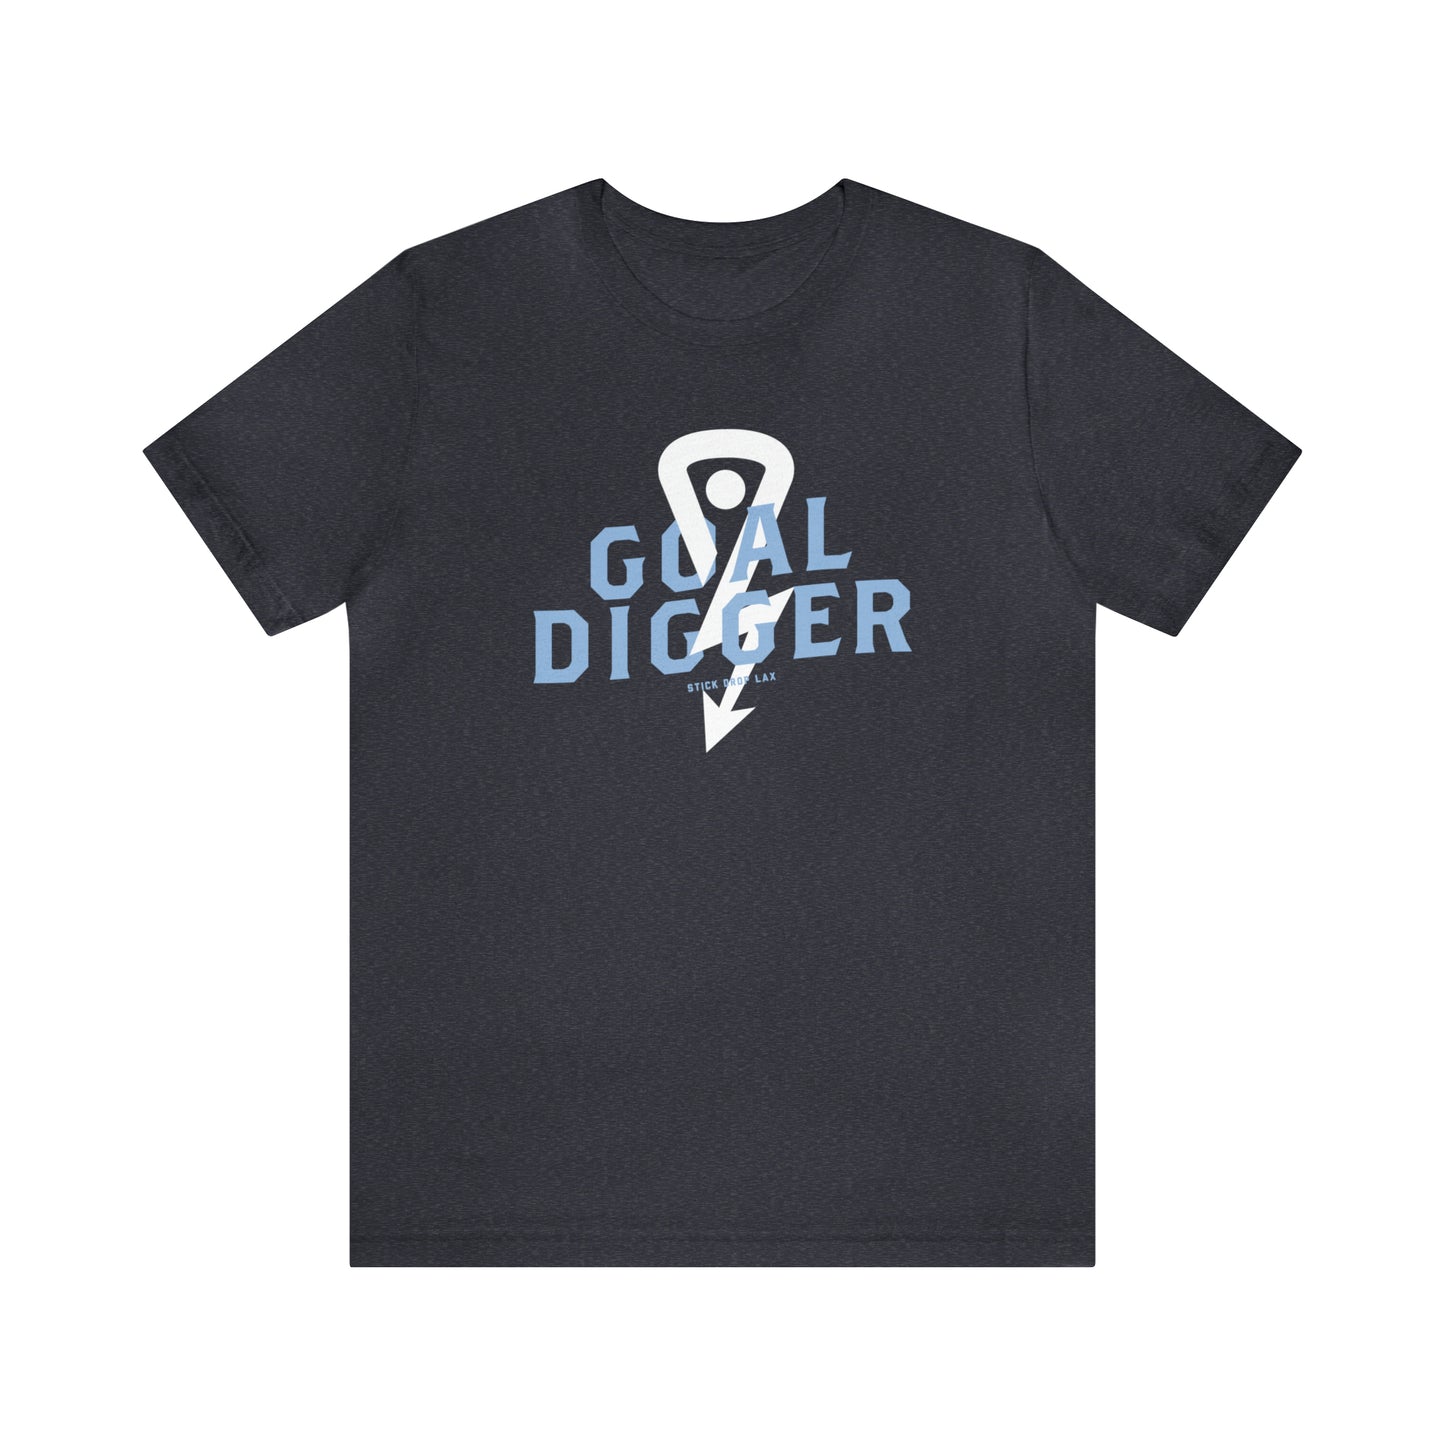 Heathered Navy T-shirt with blue text and light blue logo